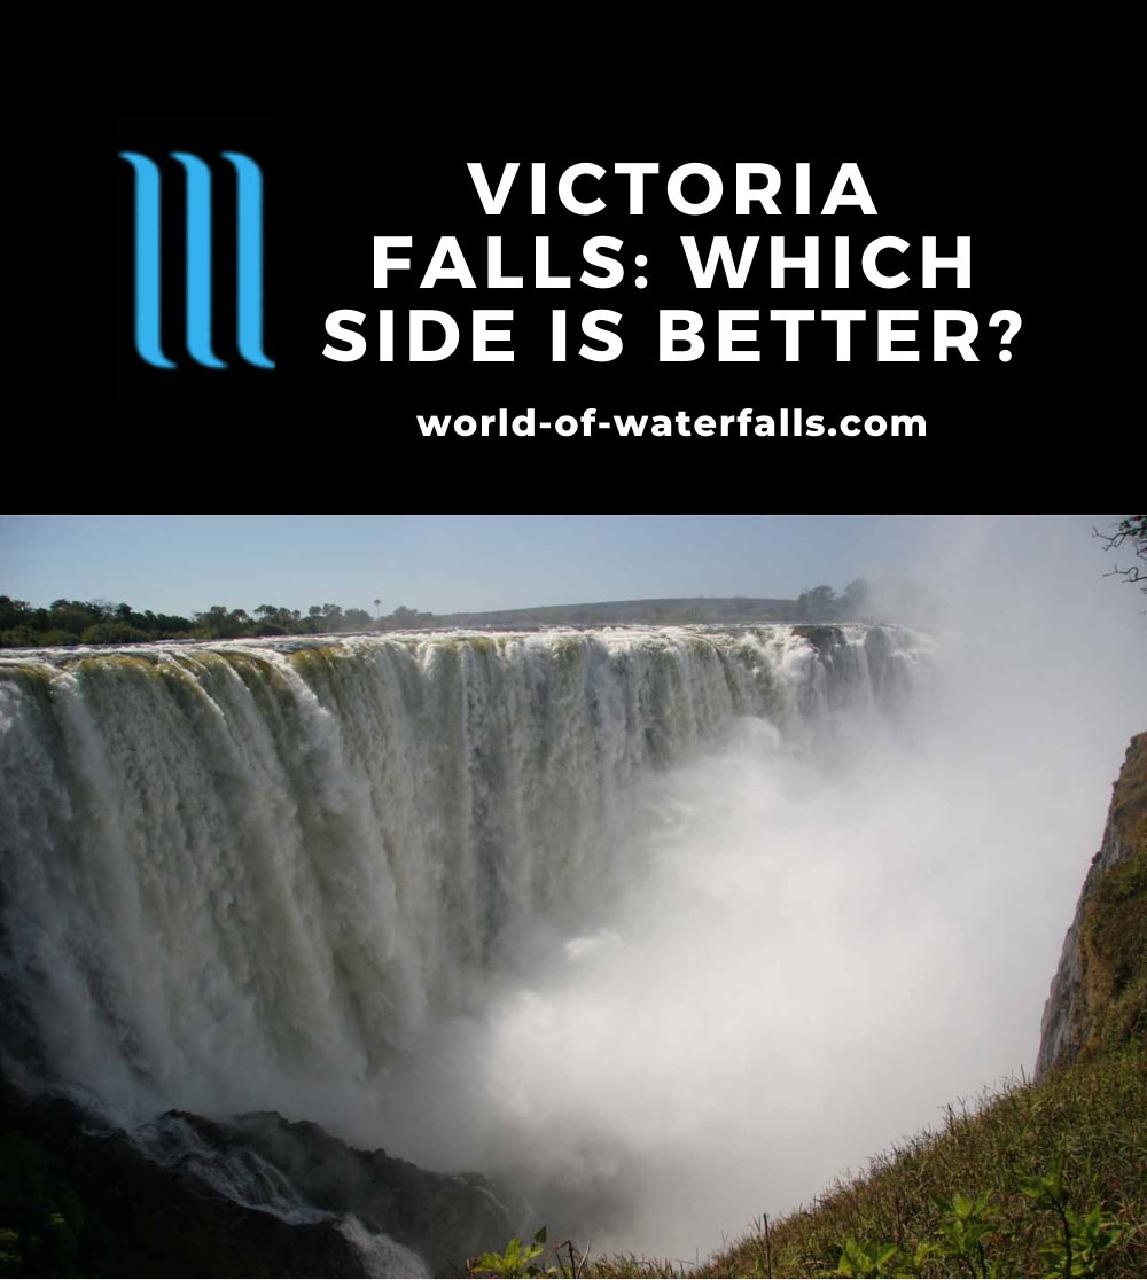 Victoria Falls: Which Side Is Better?